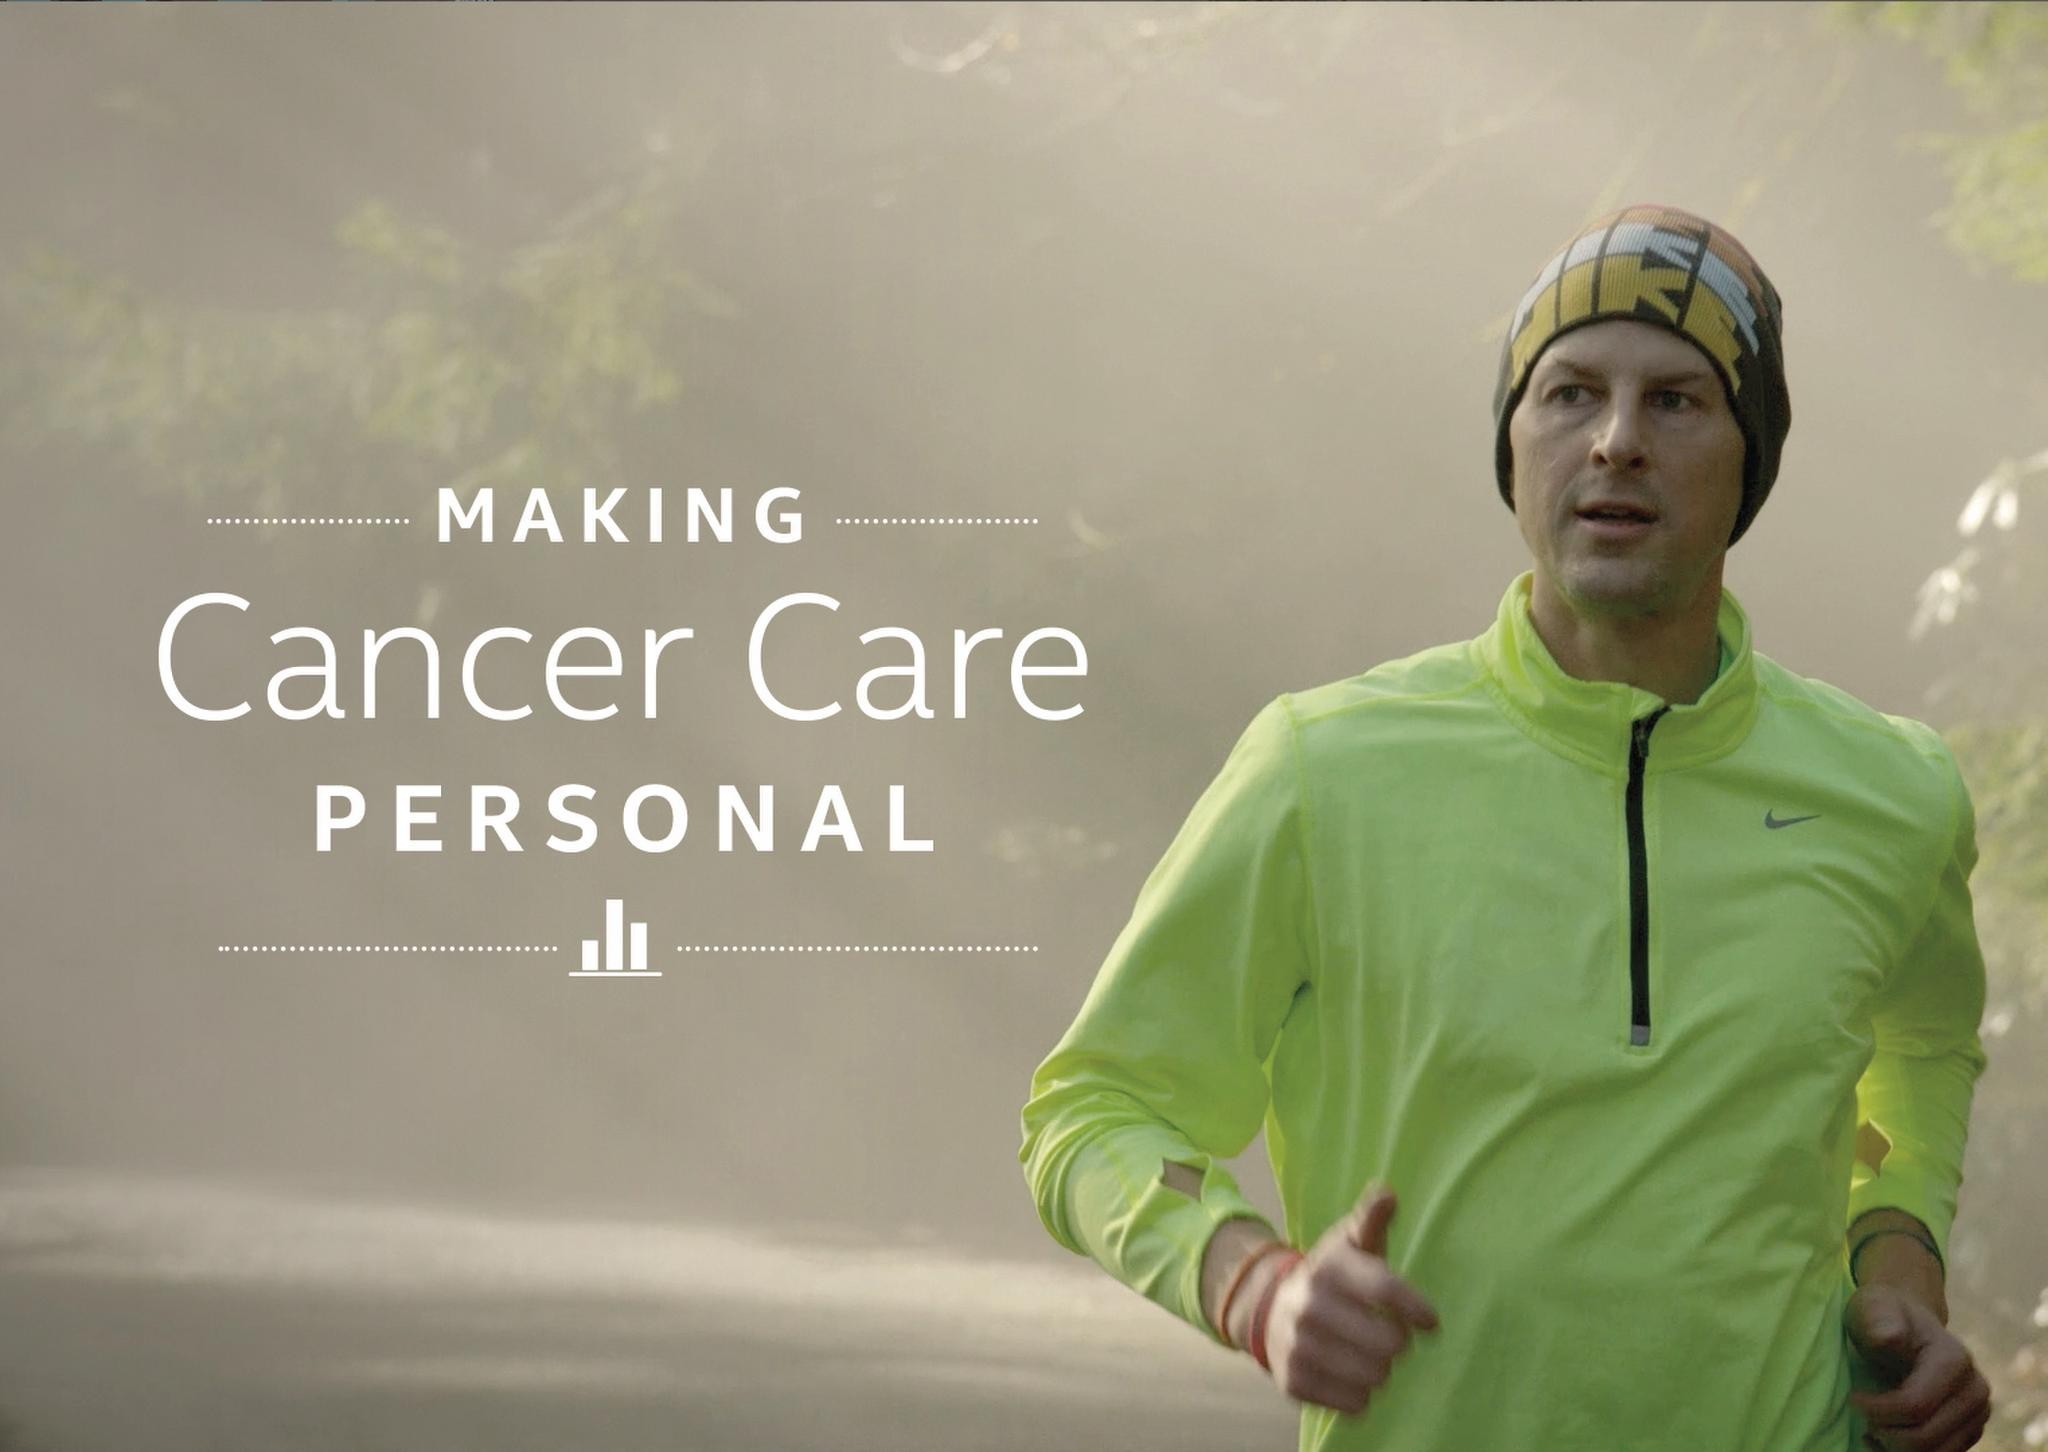 Making Cancer Care Personal